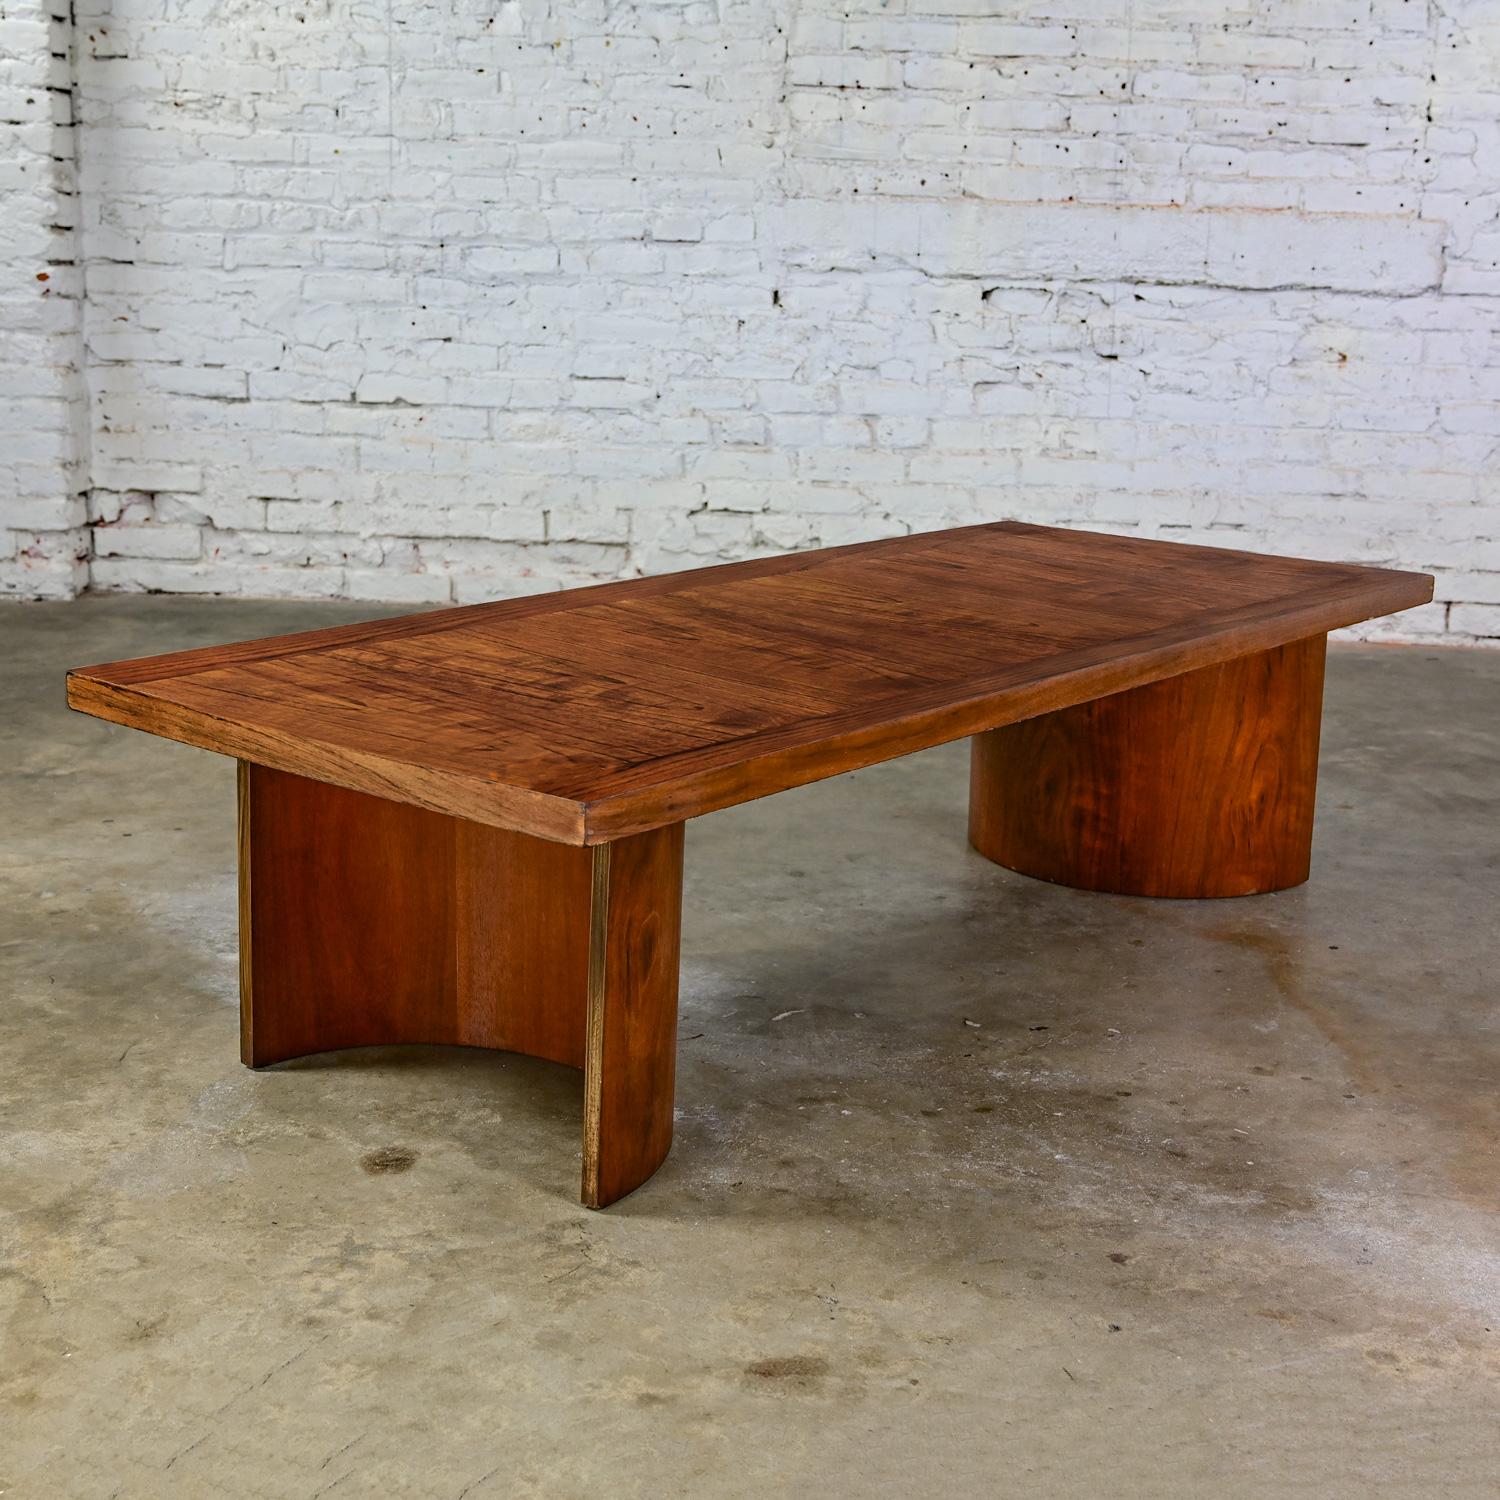 1970’s Modern Coffee Table Kroehler Rectangle Top Bentwood Curved Double U Base For Sale 7